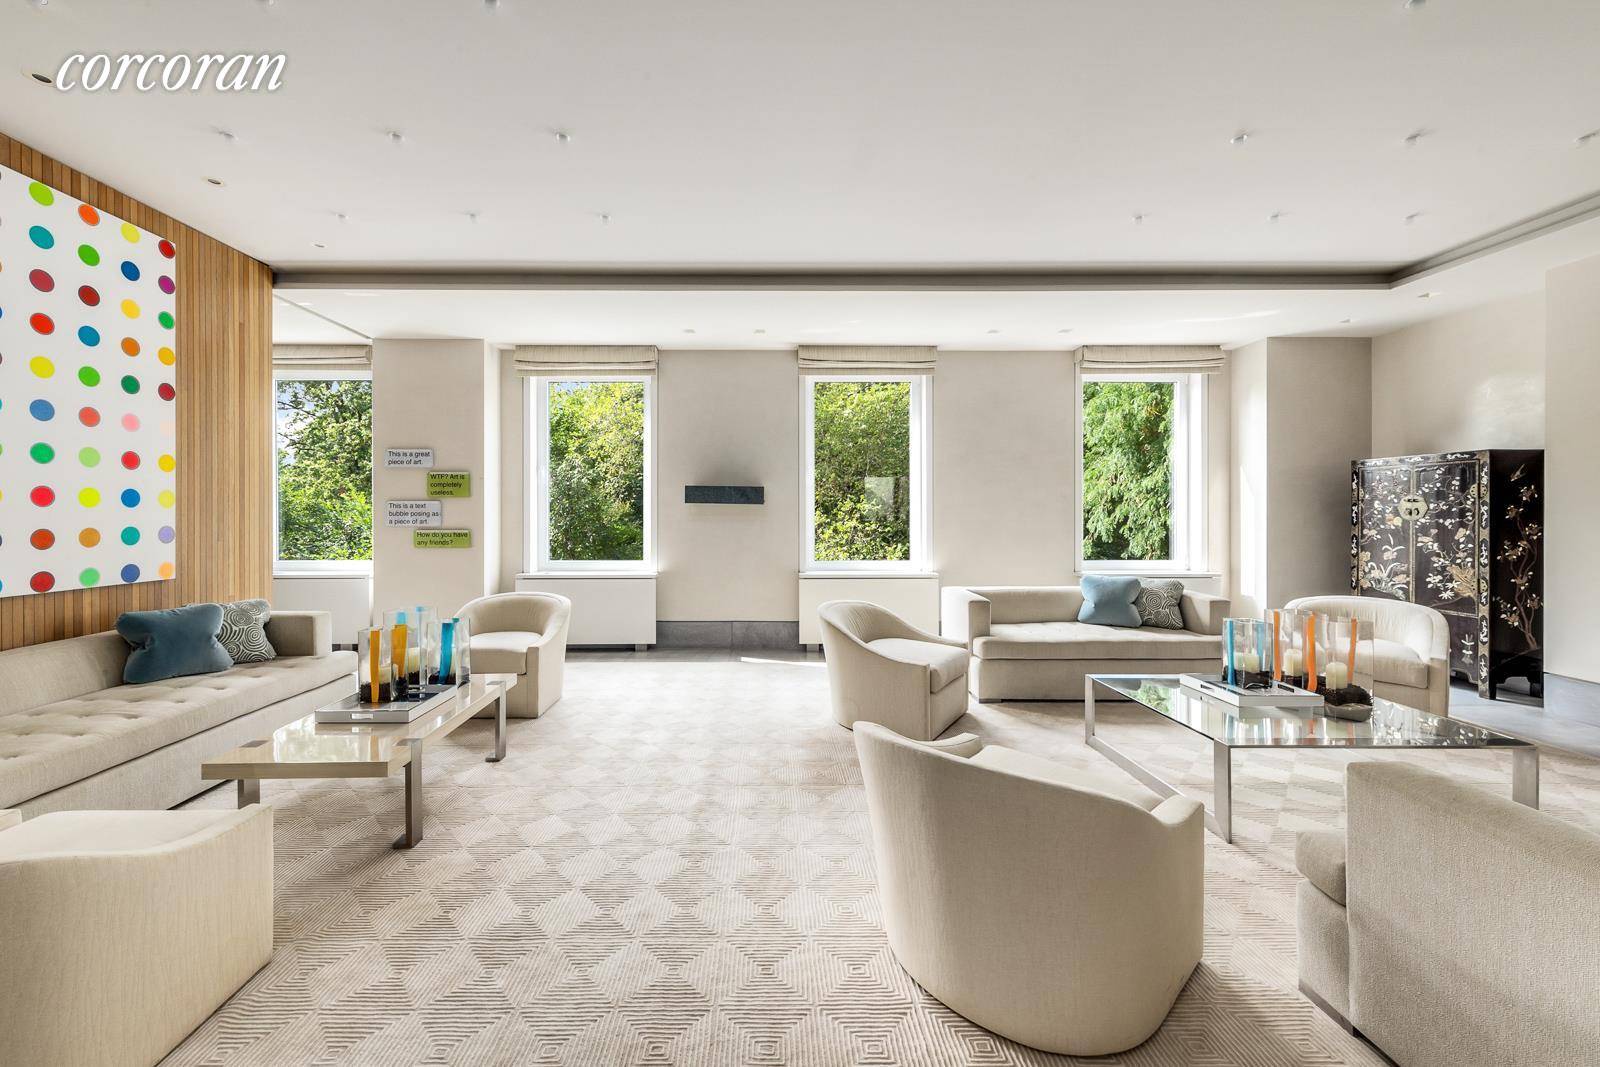 944 Fifth Avenue's 3rd Floor Residence is thoughtfully designed by Leroy Street Studios, and is an exceptional full floor home located in one of Manhattan's most recognized addresses.